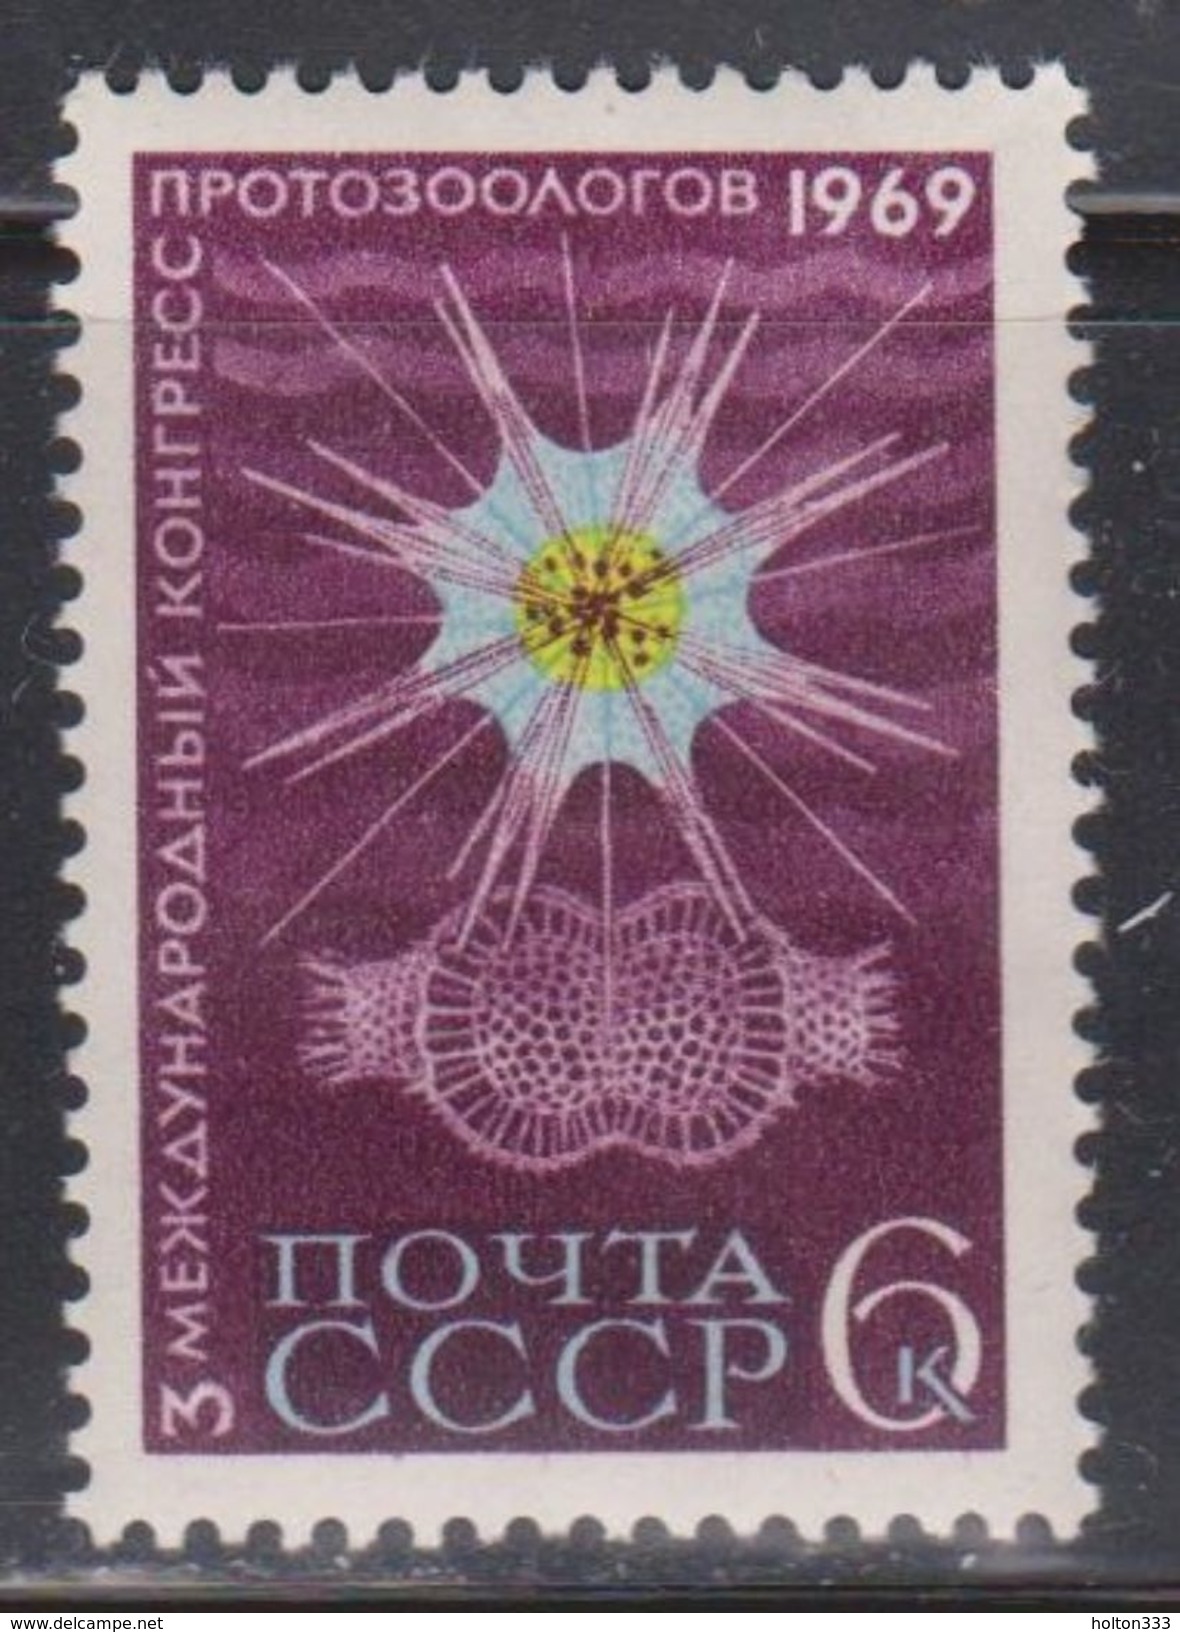 RUSSIA Scott # 3605 Mint Hinged - Protozoologists Conference - Exprespost